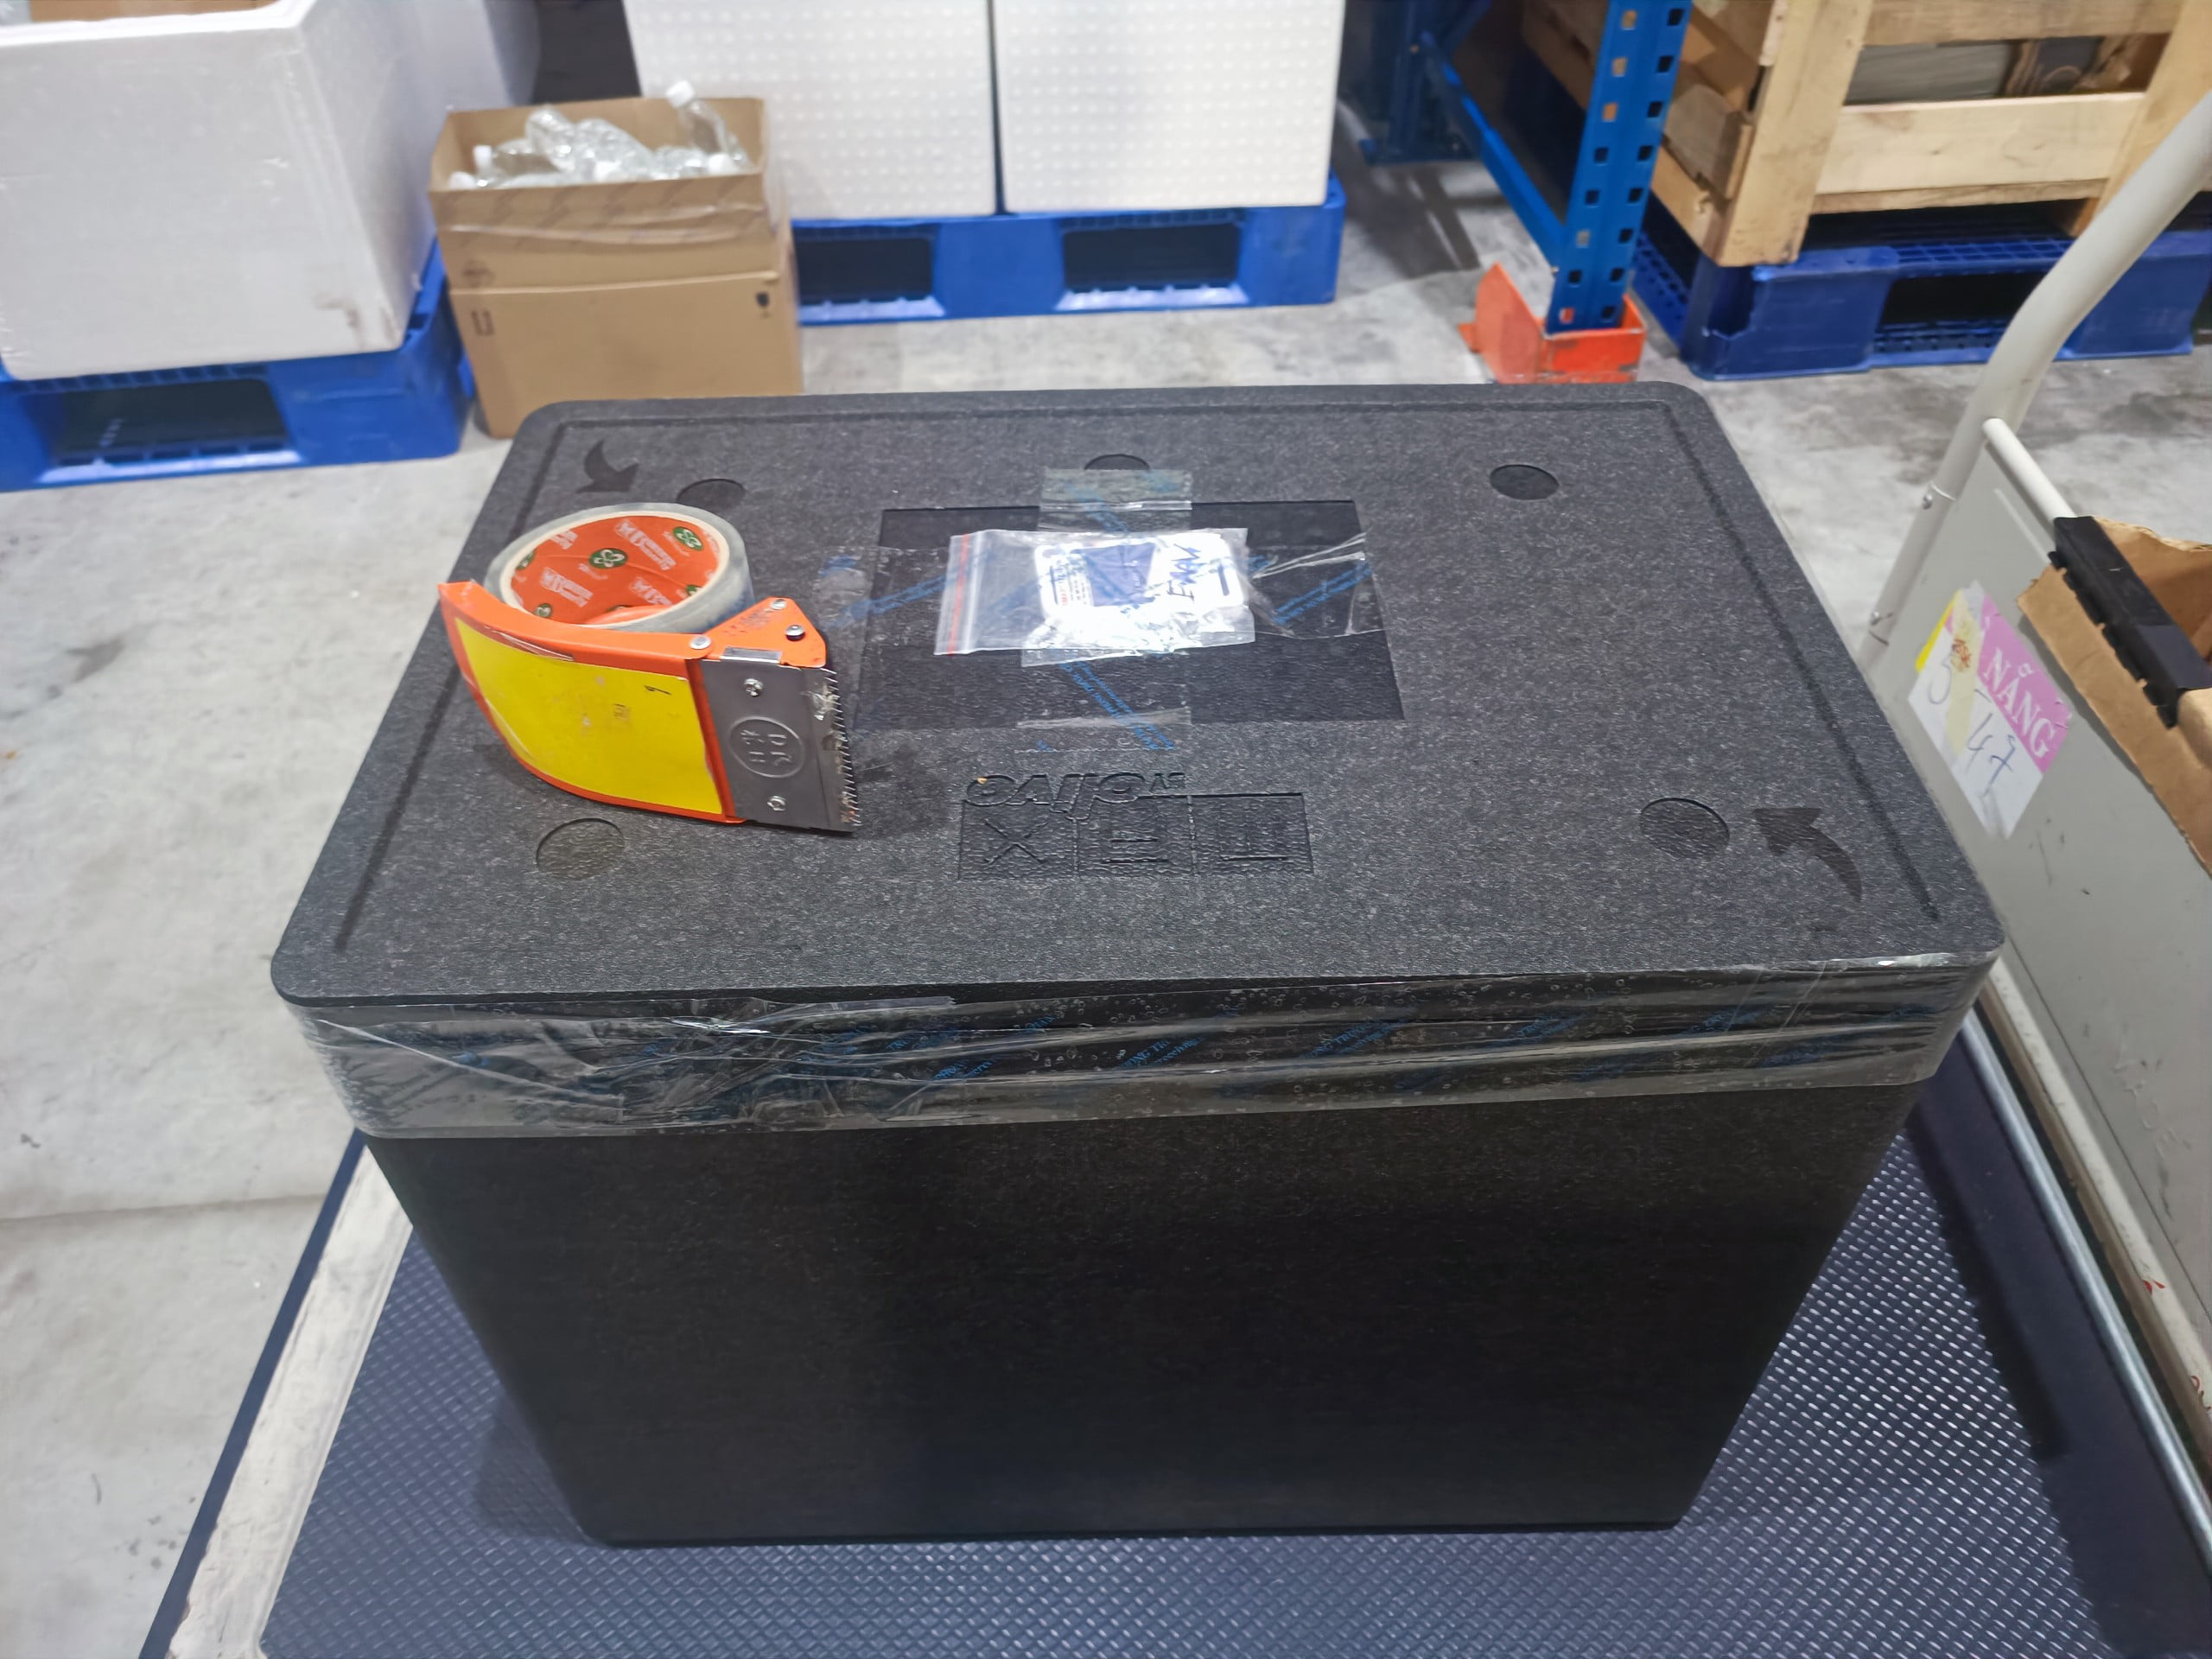 DKSH Company Adopts 20 Olivo Insulated Boxes and 140 Plates